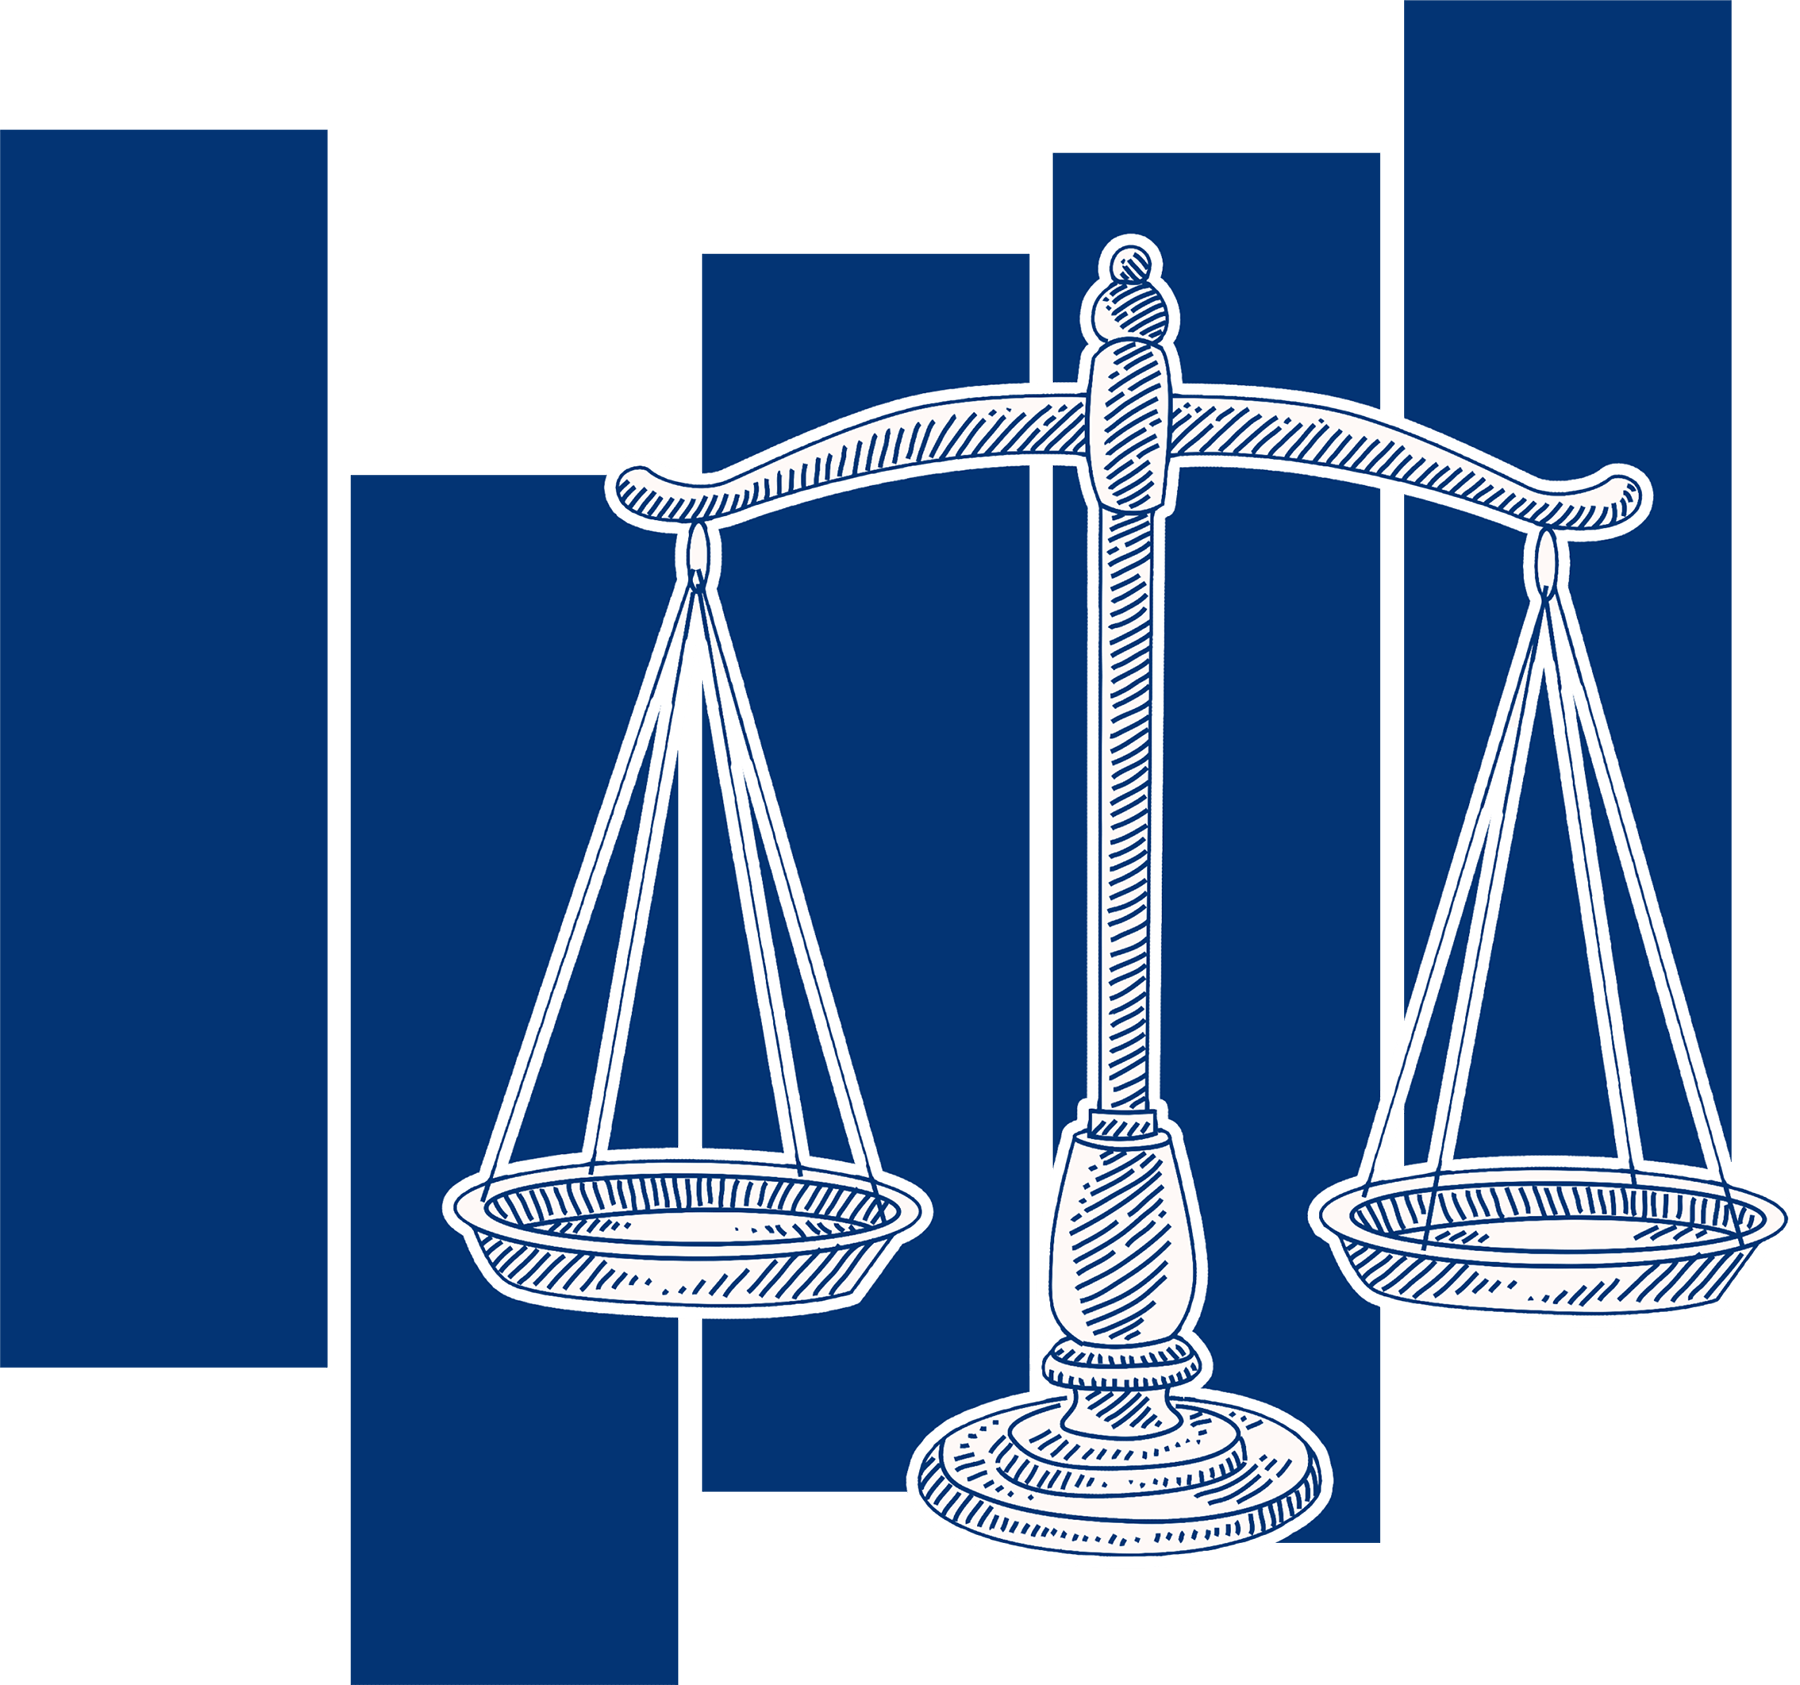 Illustration of scales of Justice in front of blue vertical bars